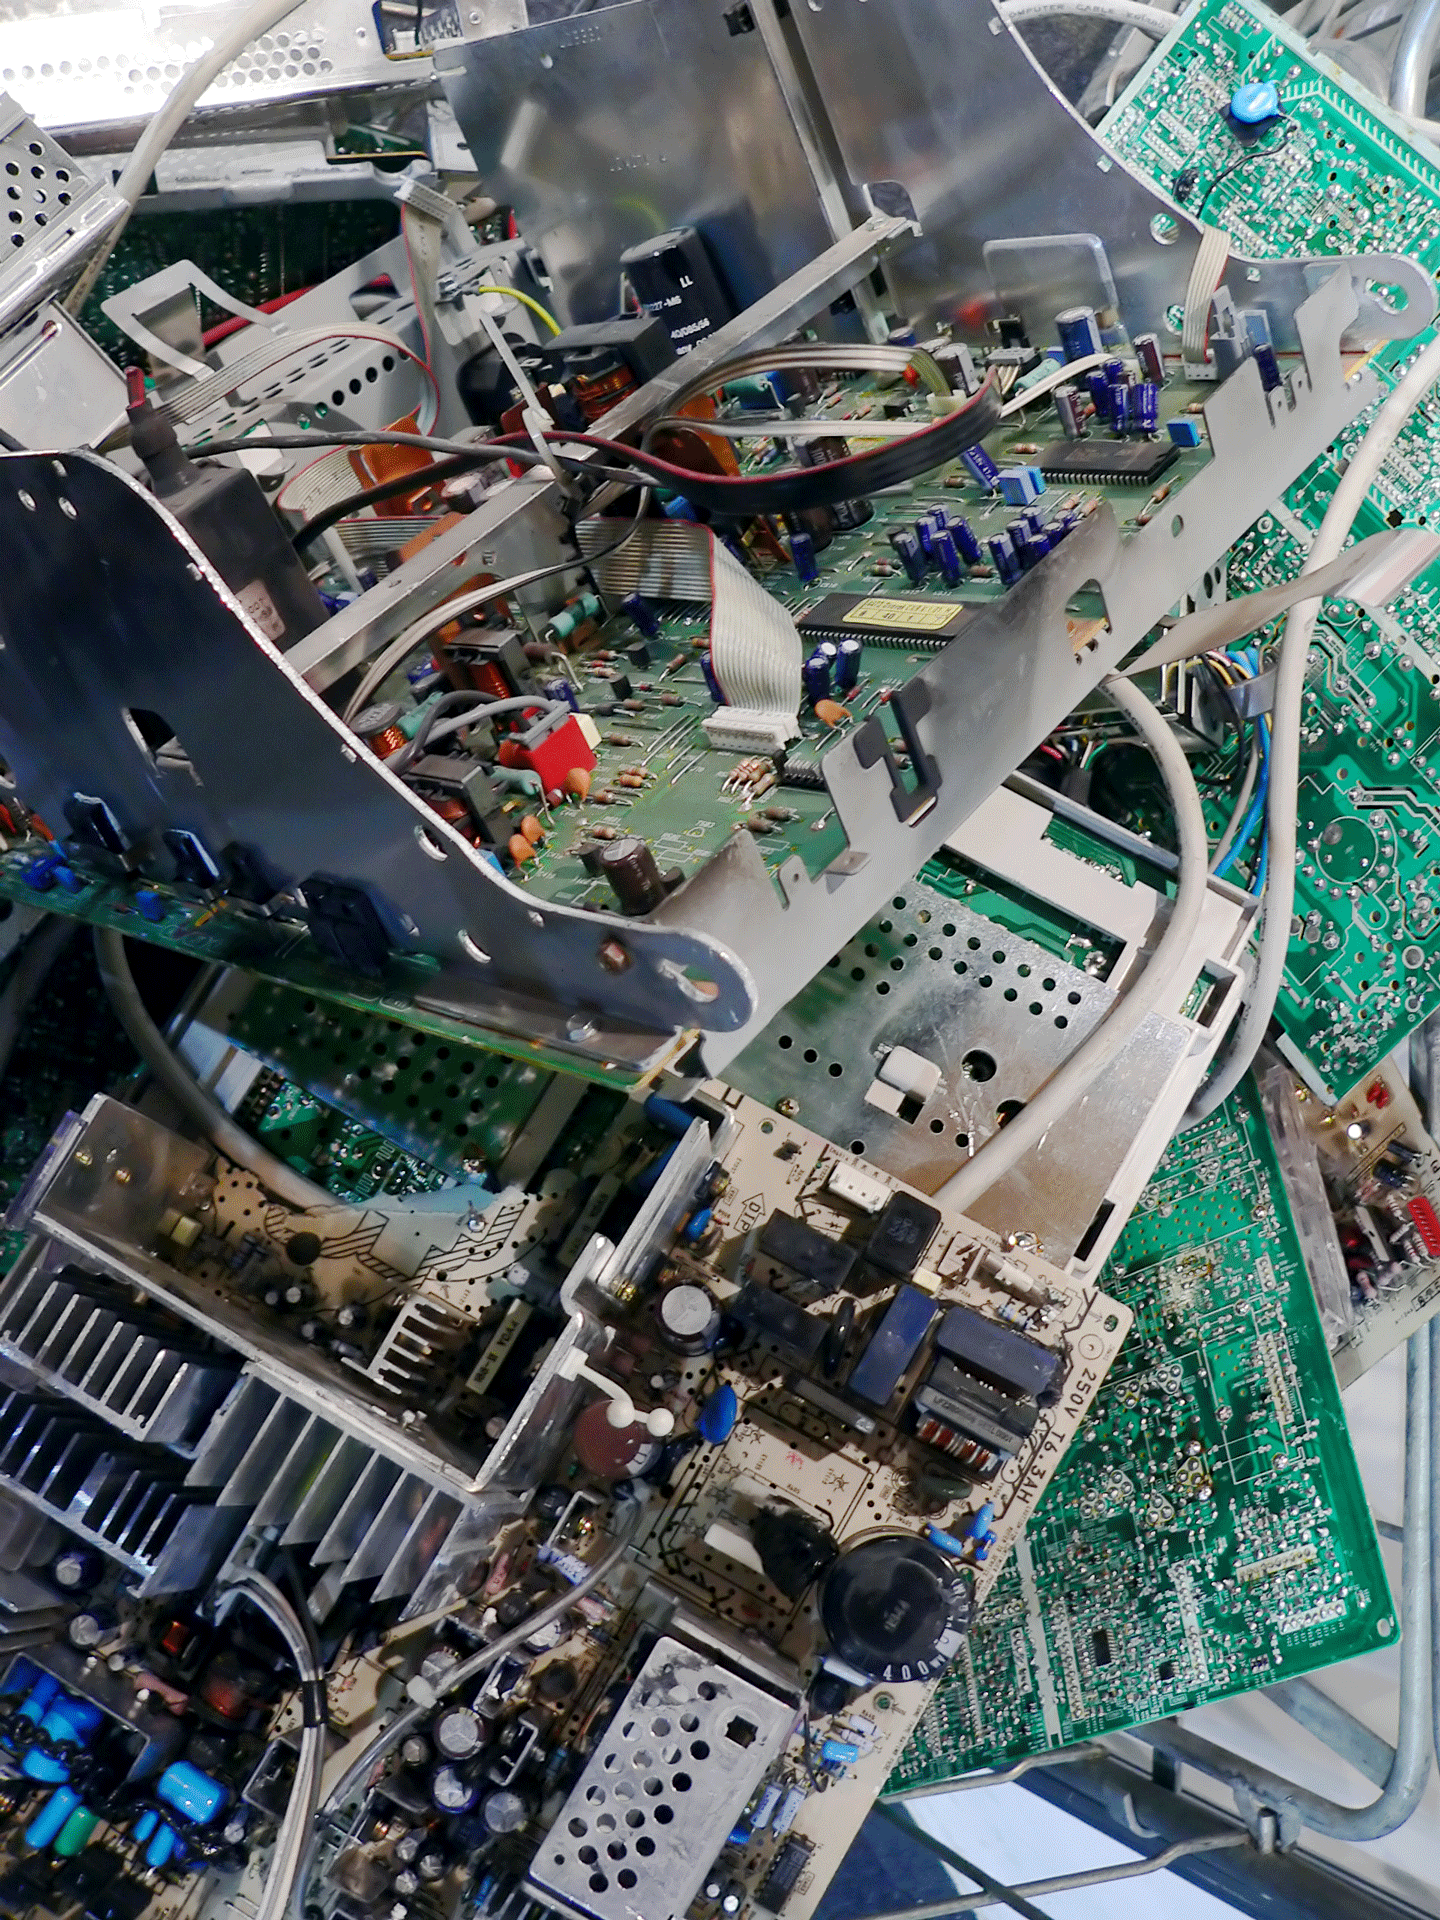 Copper Recycling — Copper Parts Of Computer in Durham, NC